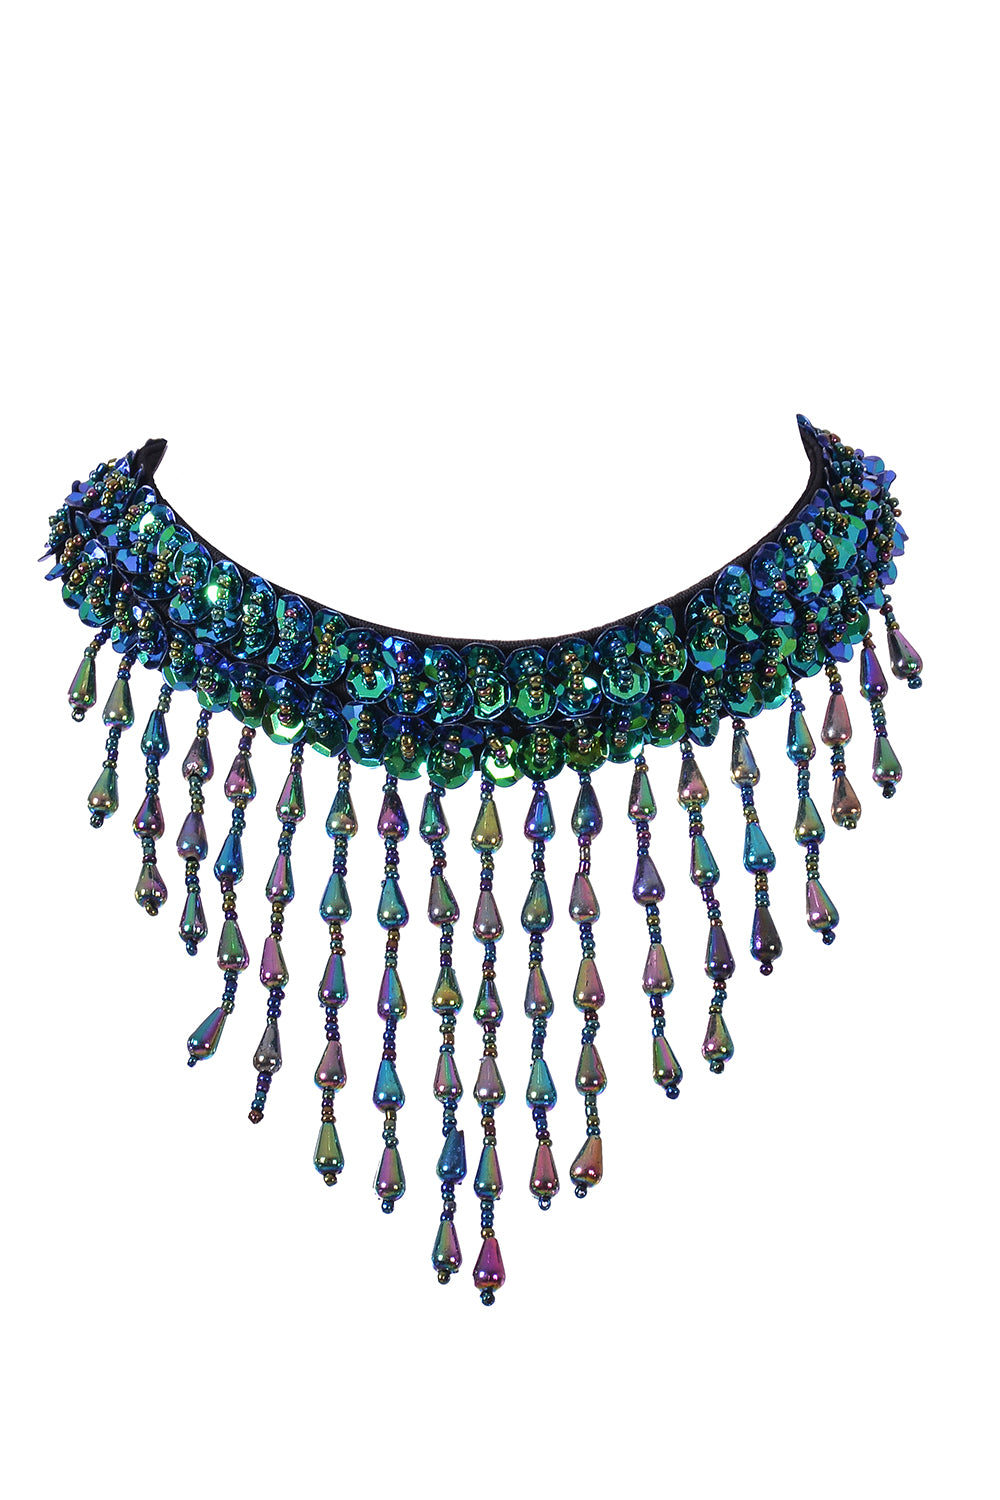 Hand Stitched Sequin Choker/Necklace - Chameleon